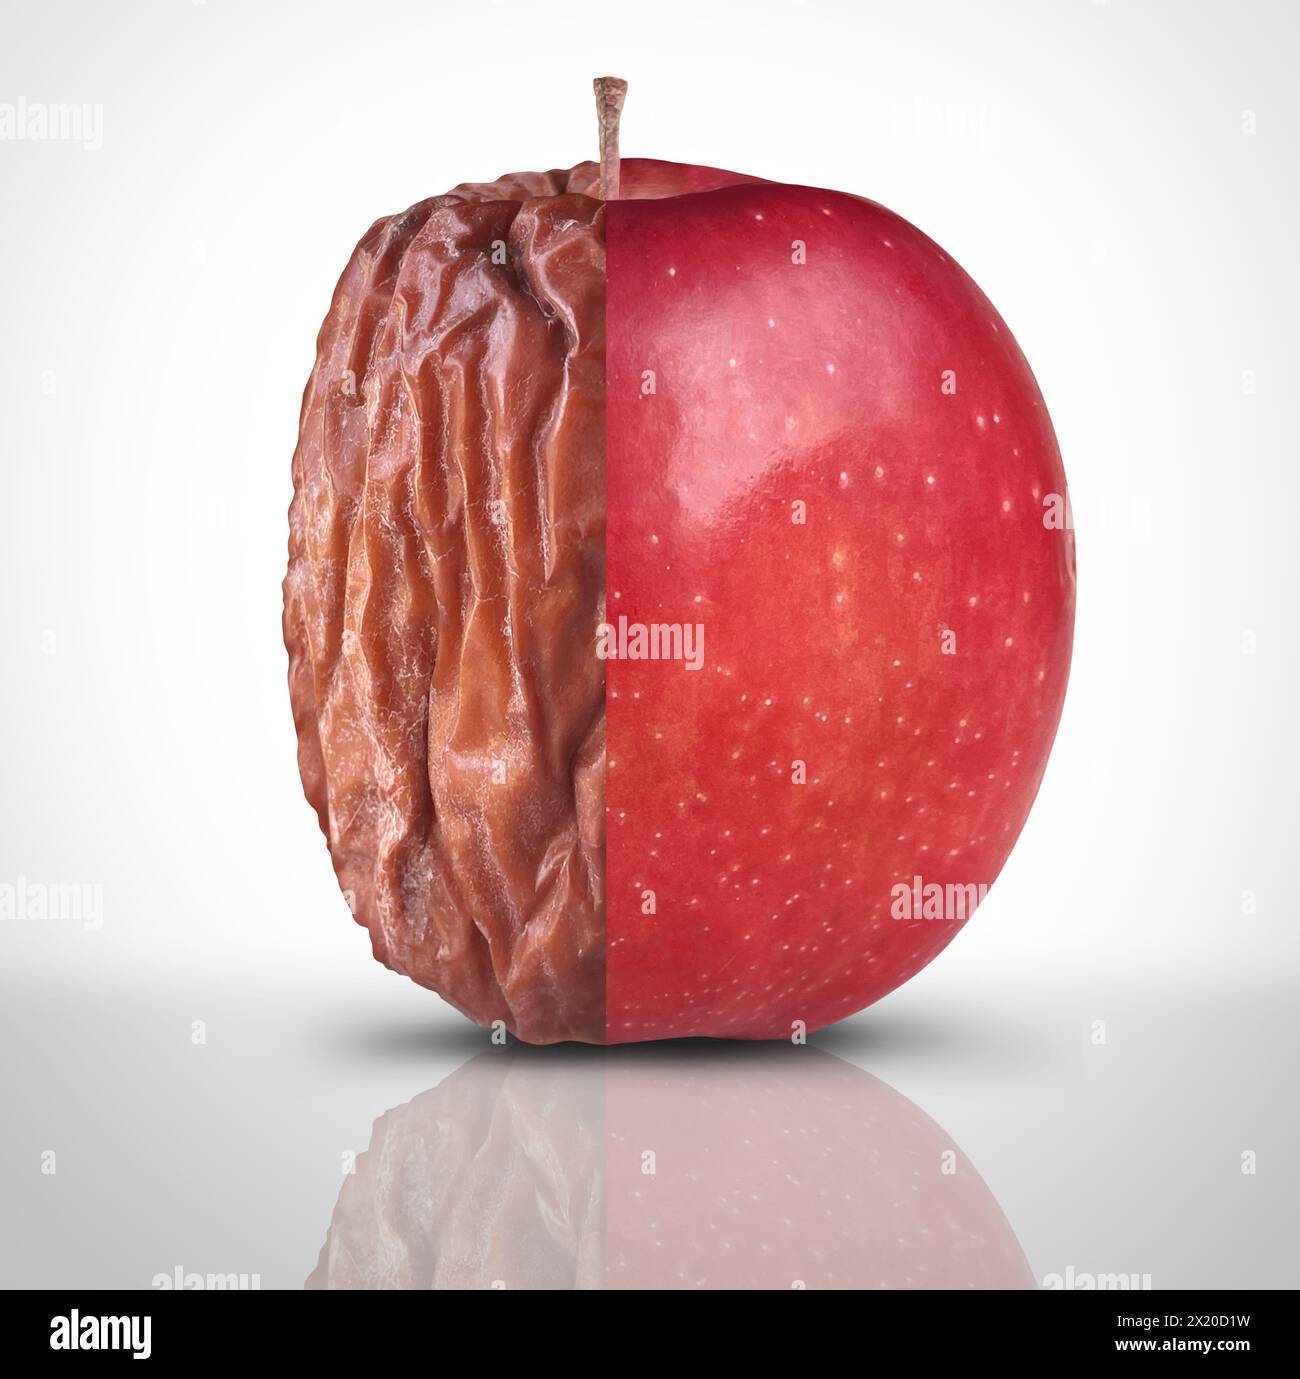 Health And Disease or Aging Process and mental health symbol as a new fresh ripe red apple decomposing and getting old and wrinkled as a symbol Stock Photo